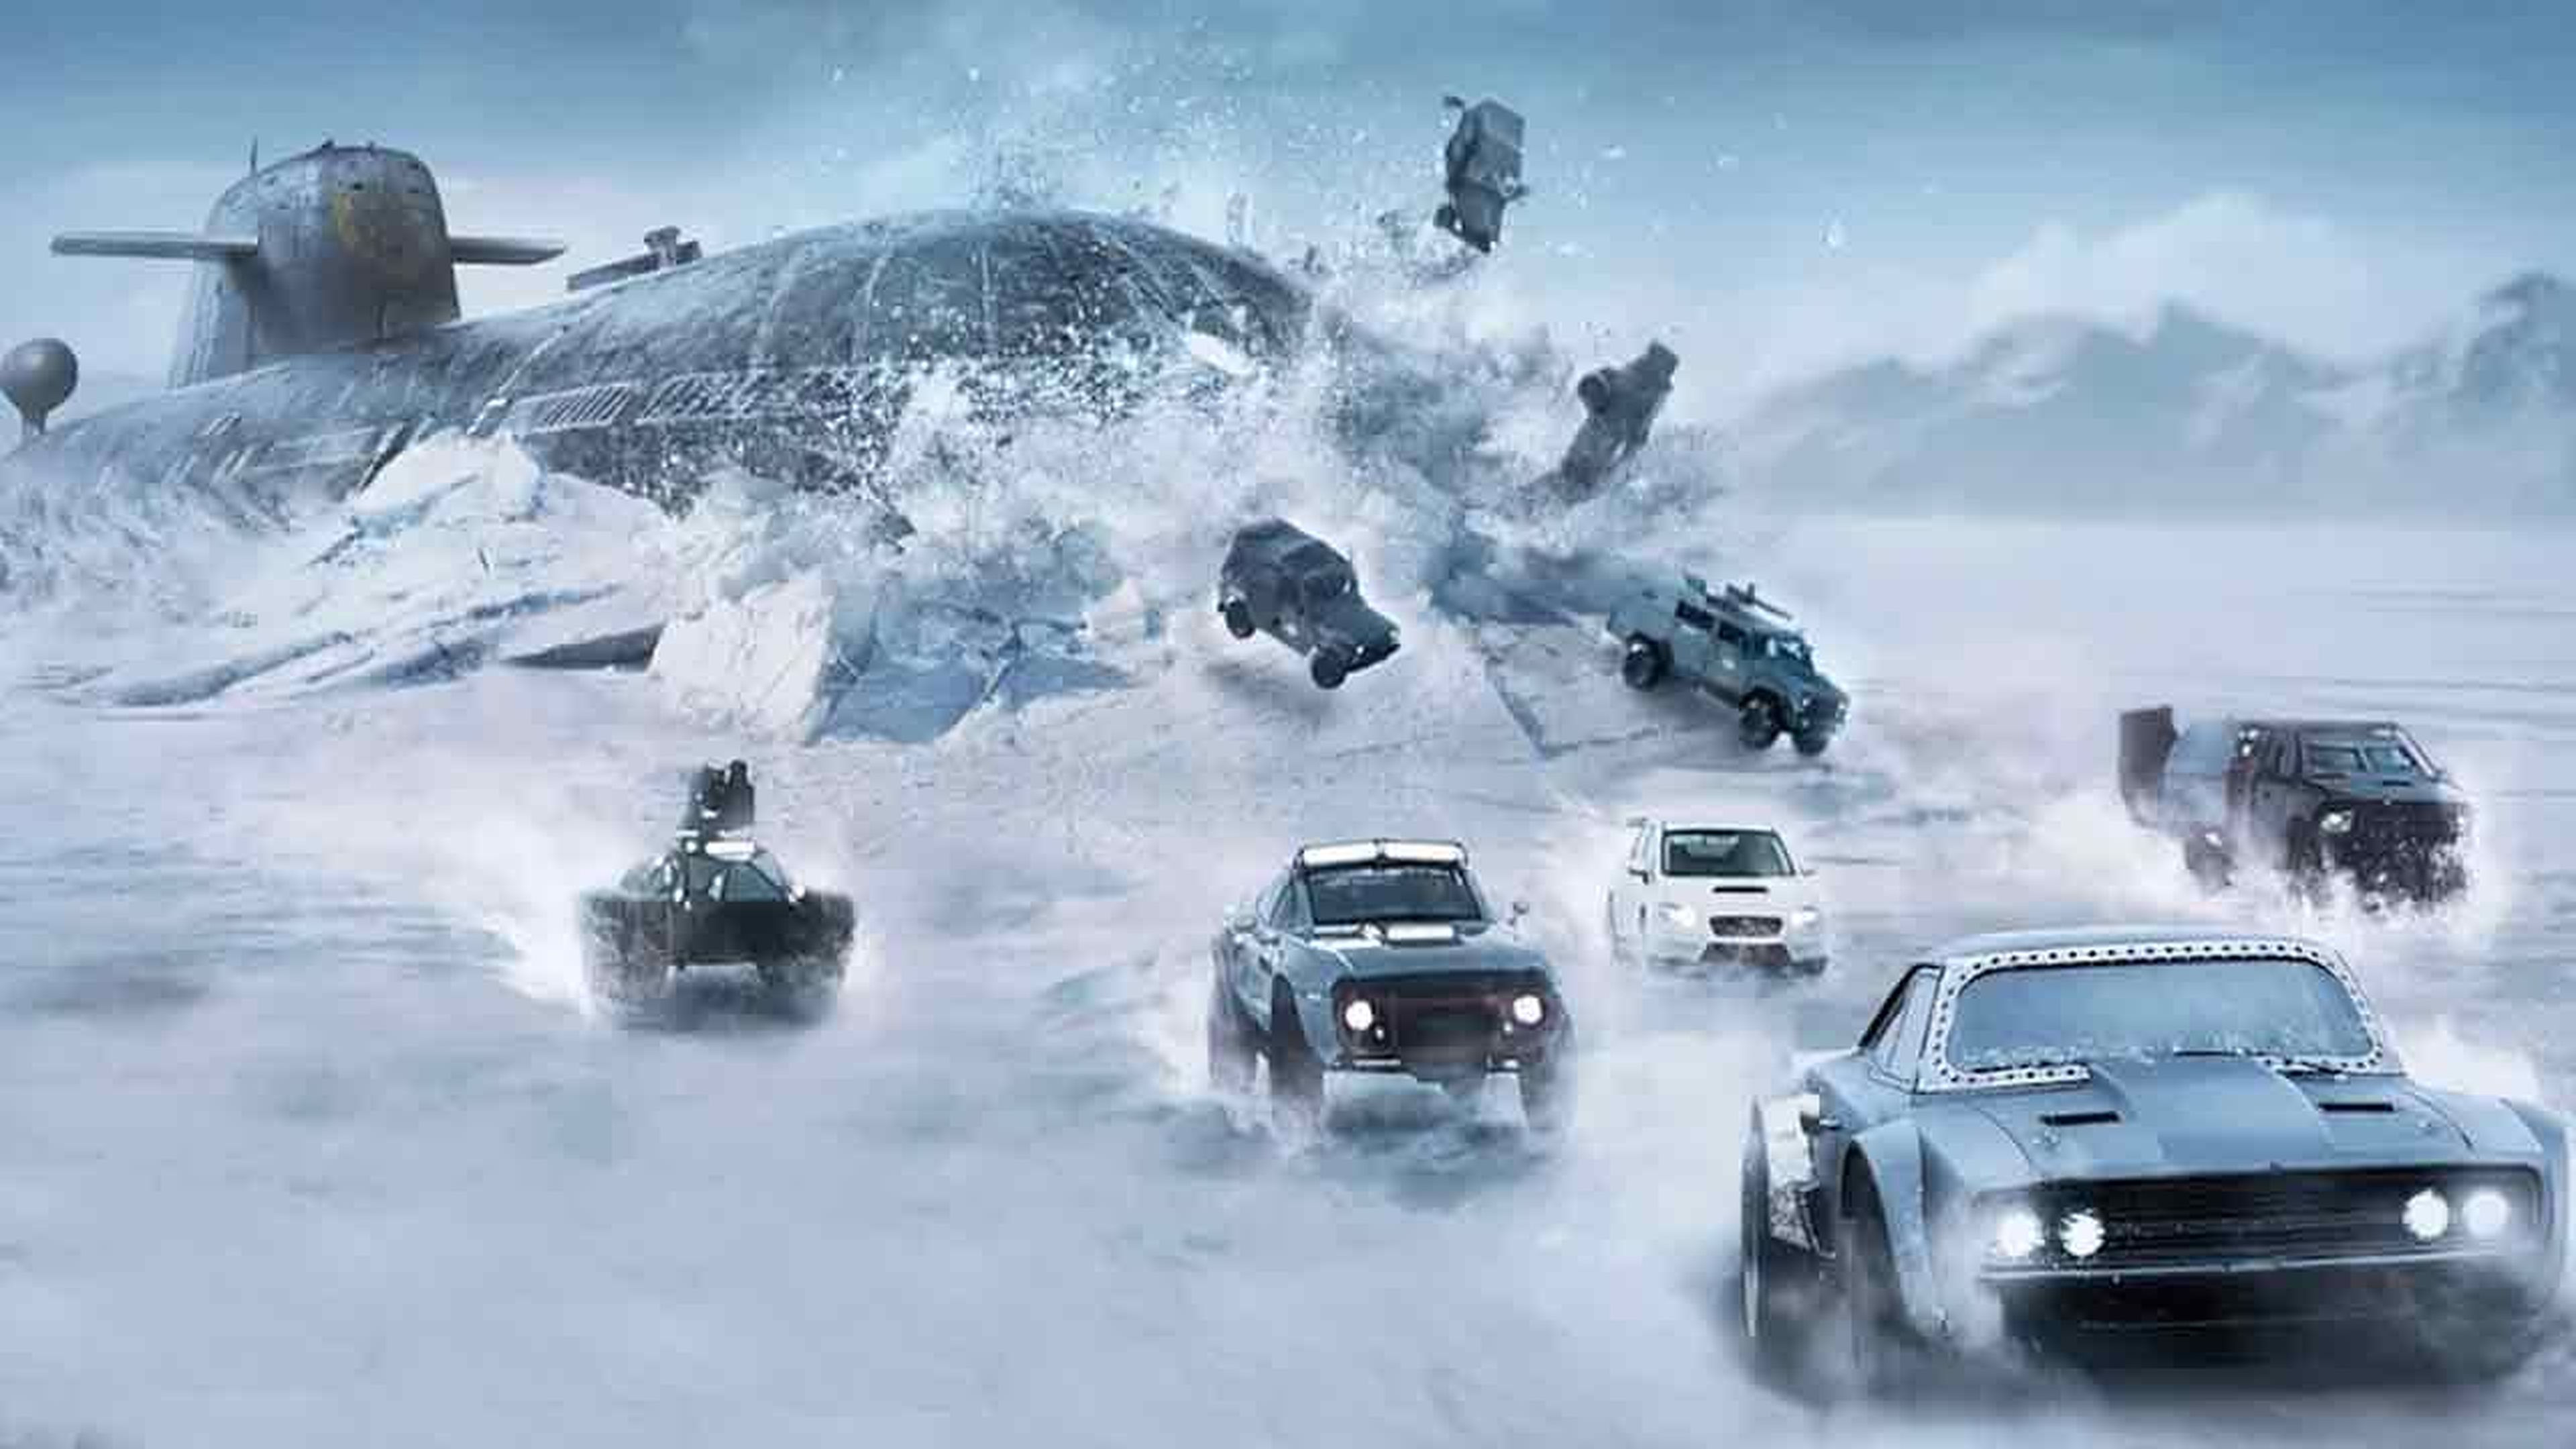 Fast & Furious 8 - Clip "Fire and Ice" en exclusiva